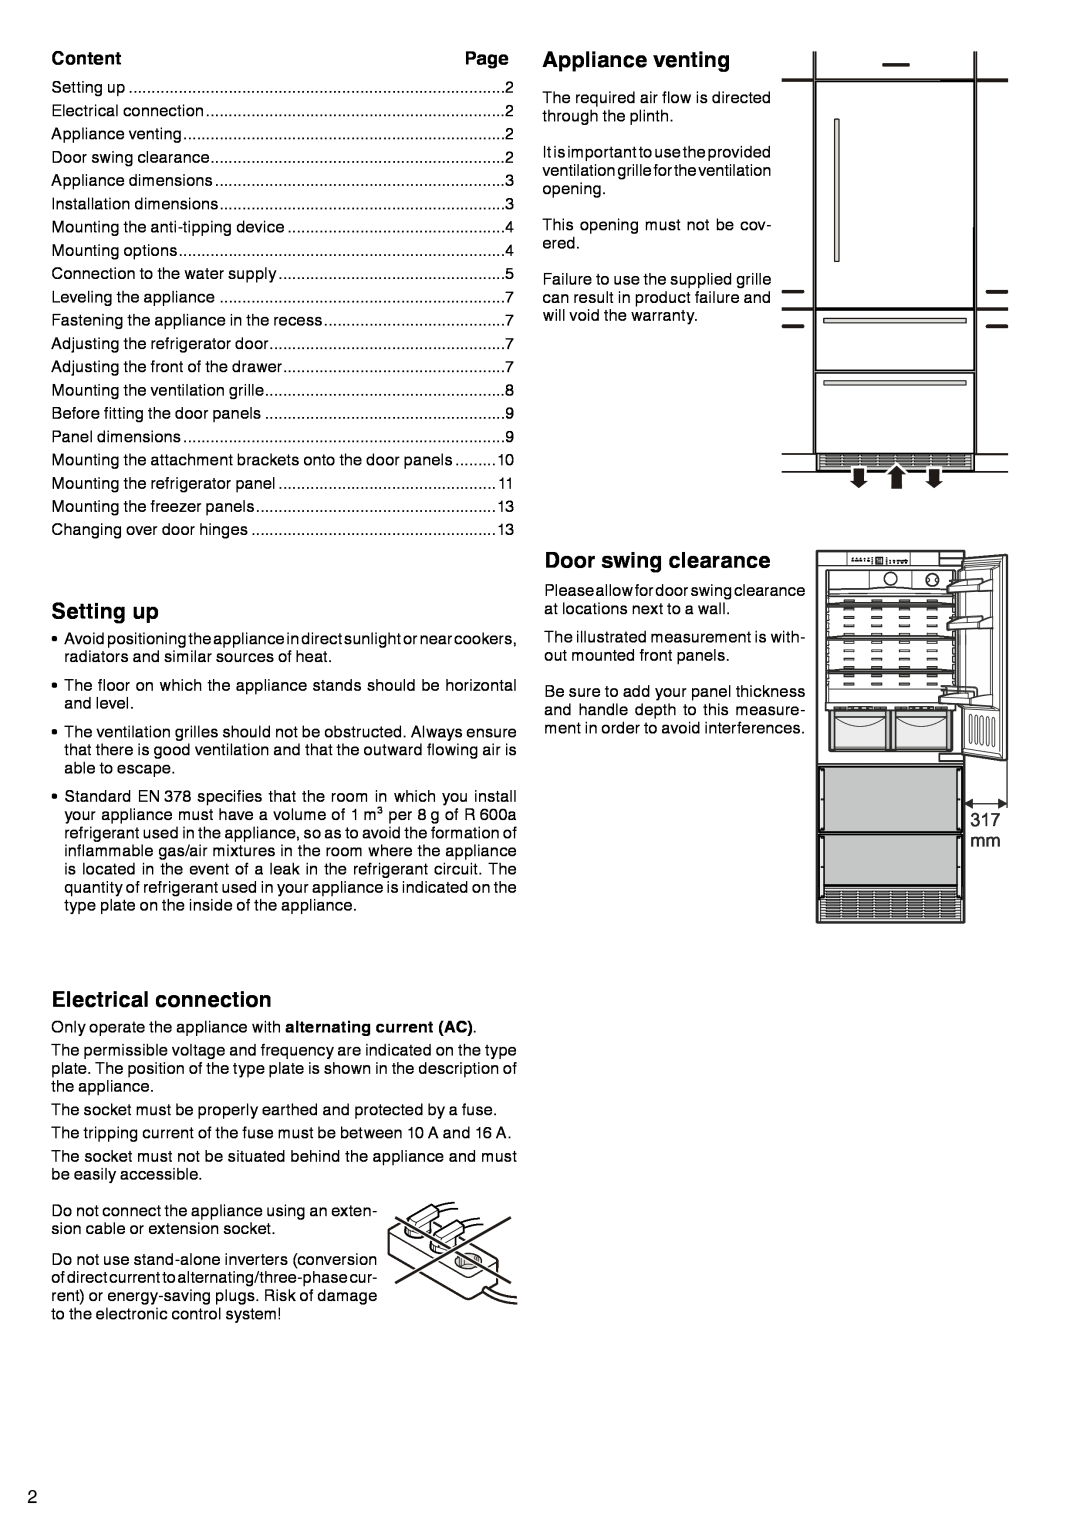 Liebherr 7083 461-00 manual Setting up, Electrical connection, Appliance venting, Door swing clearance, Content, Page 